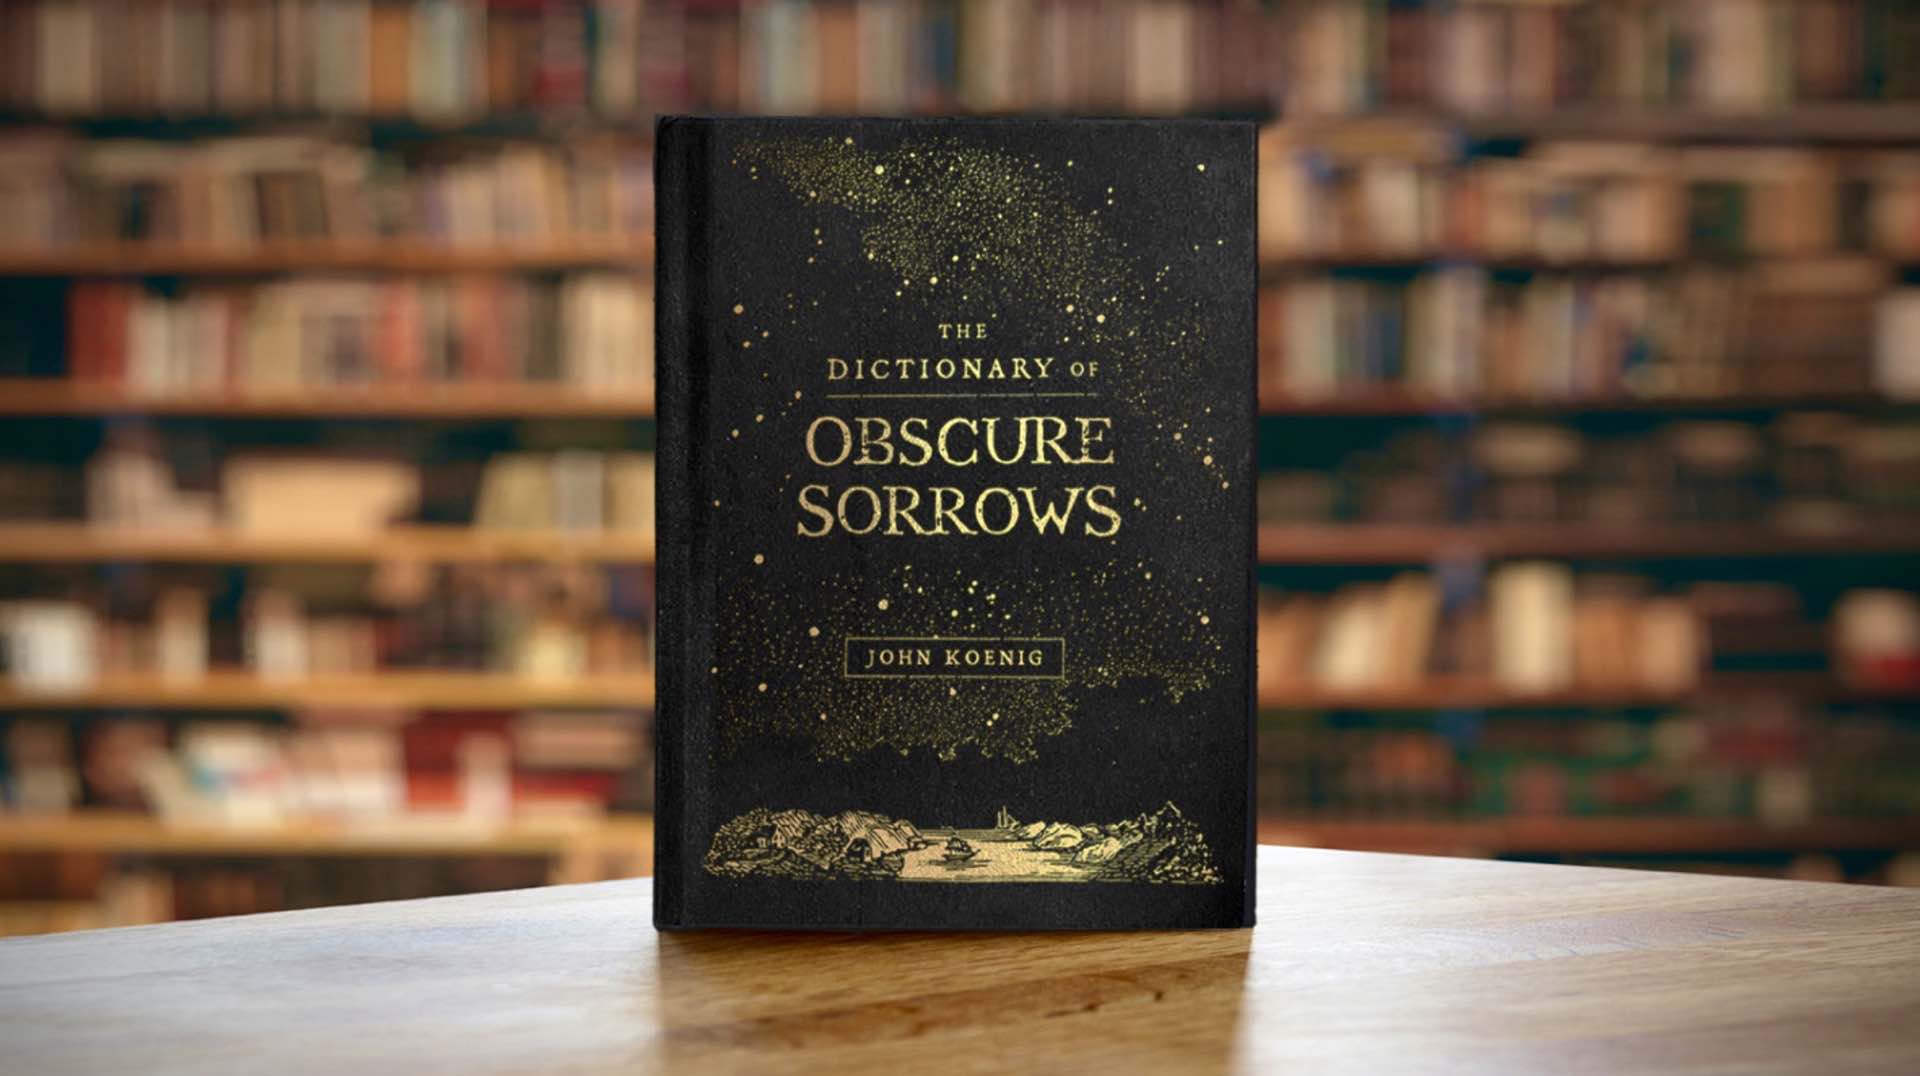 The Dictionary of Obscure Sorrows by John Koenig. ($18 hardcover)